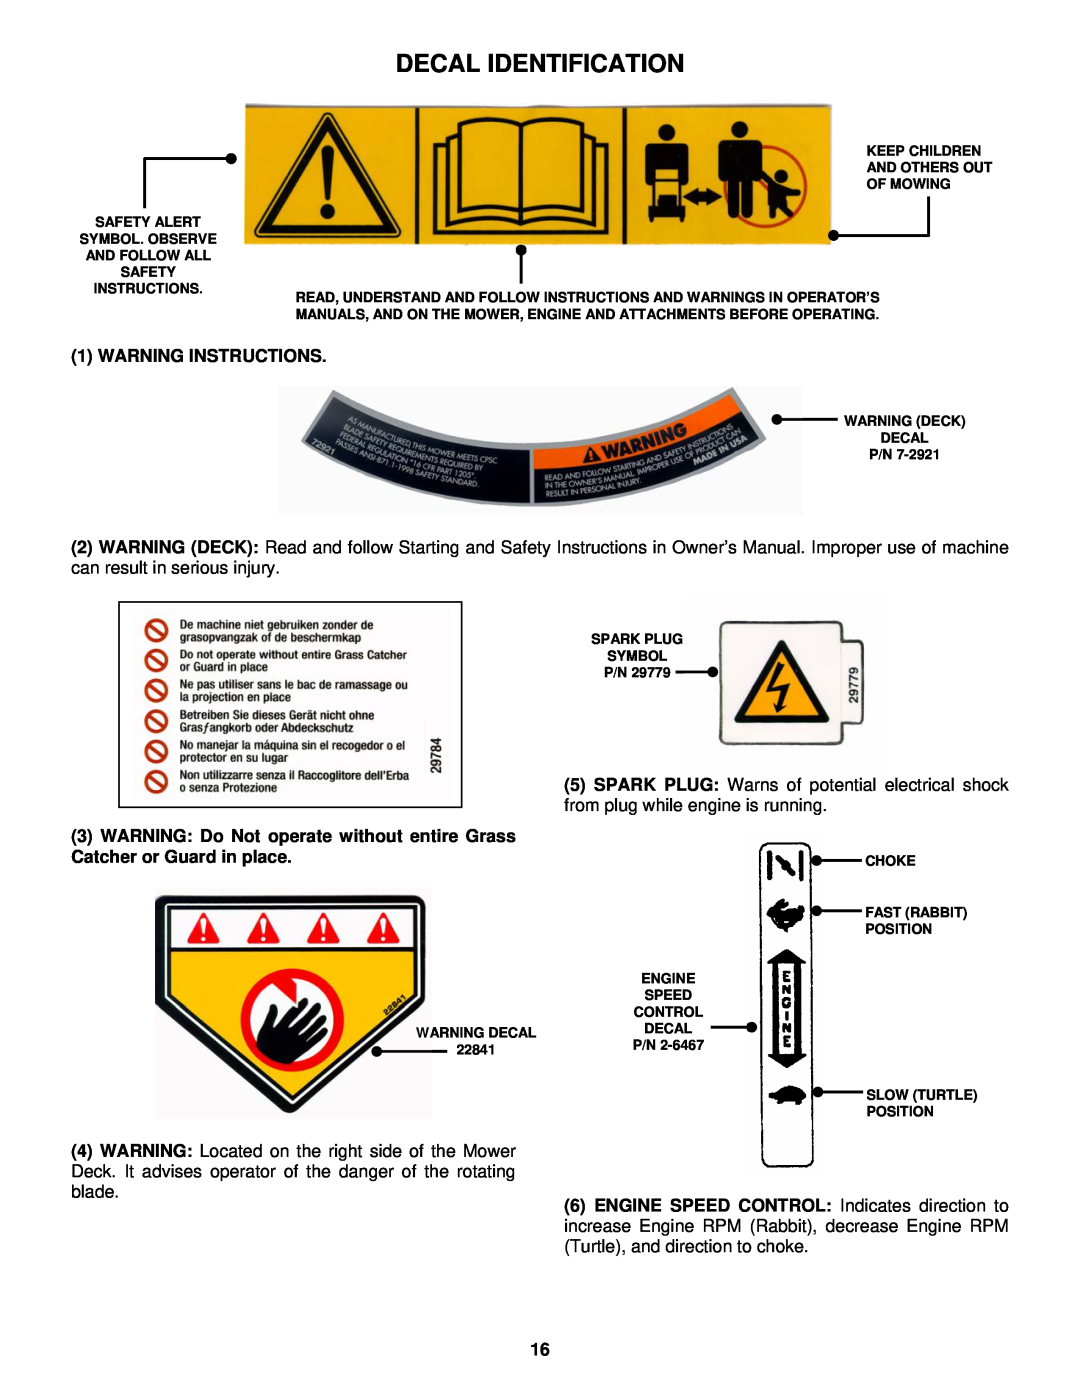 Snapper ECLP21 551HV important safety instructions Decal Identification, Warning Instructions 